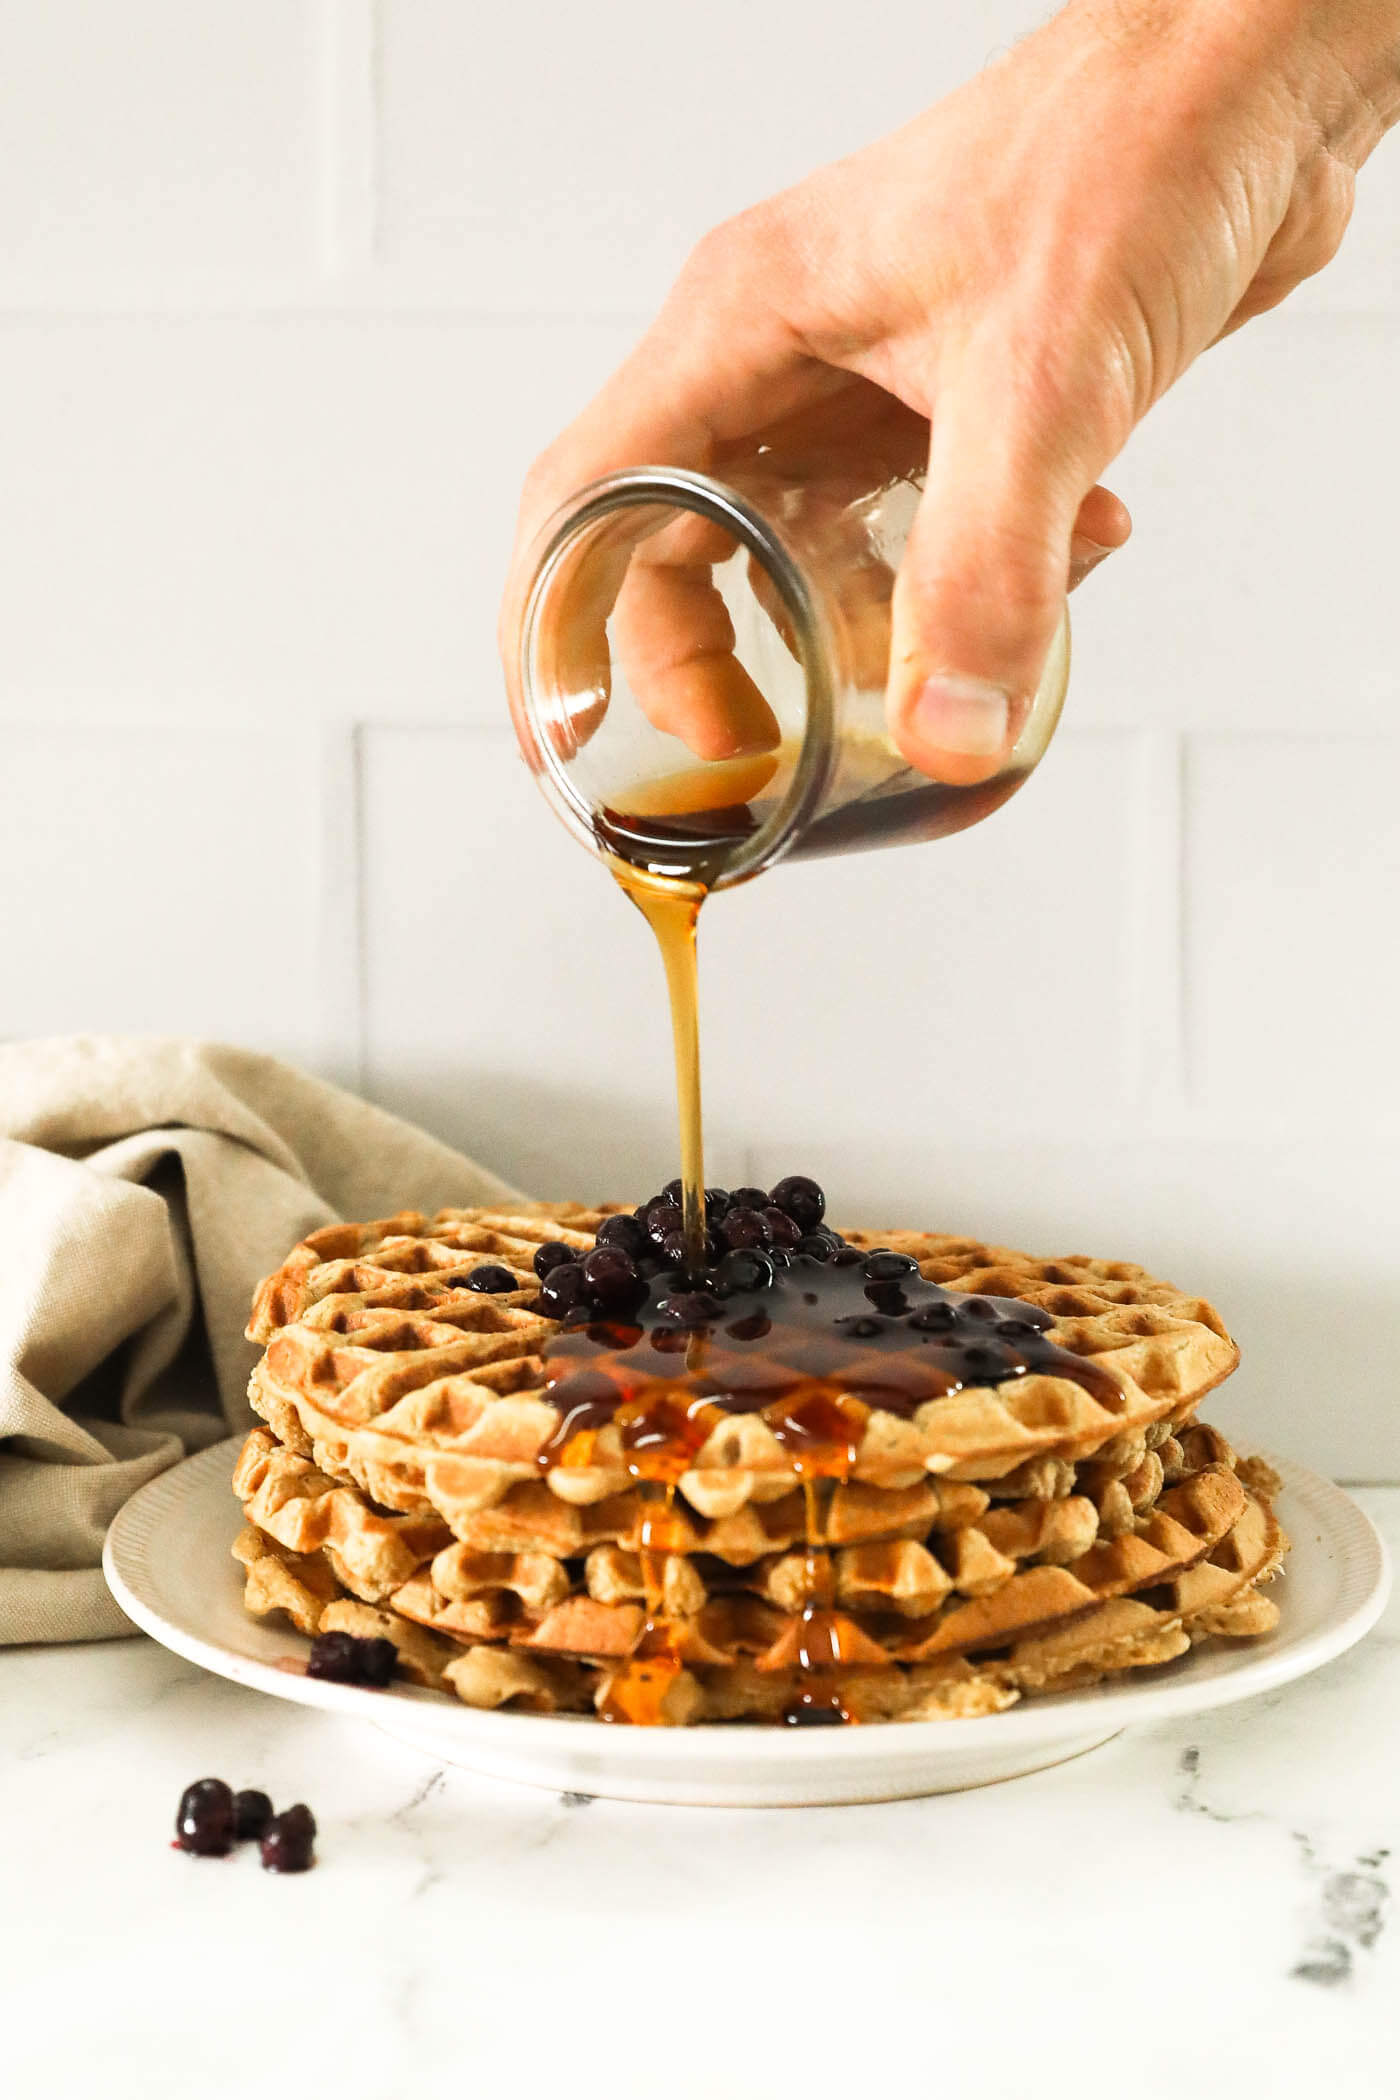 Image of a hand pouring maple syrup on a stack of waffles with wild blueberries on top.